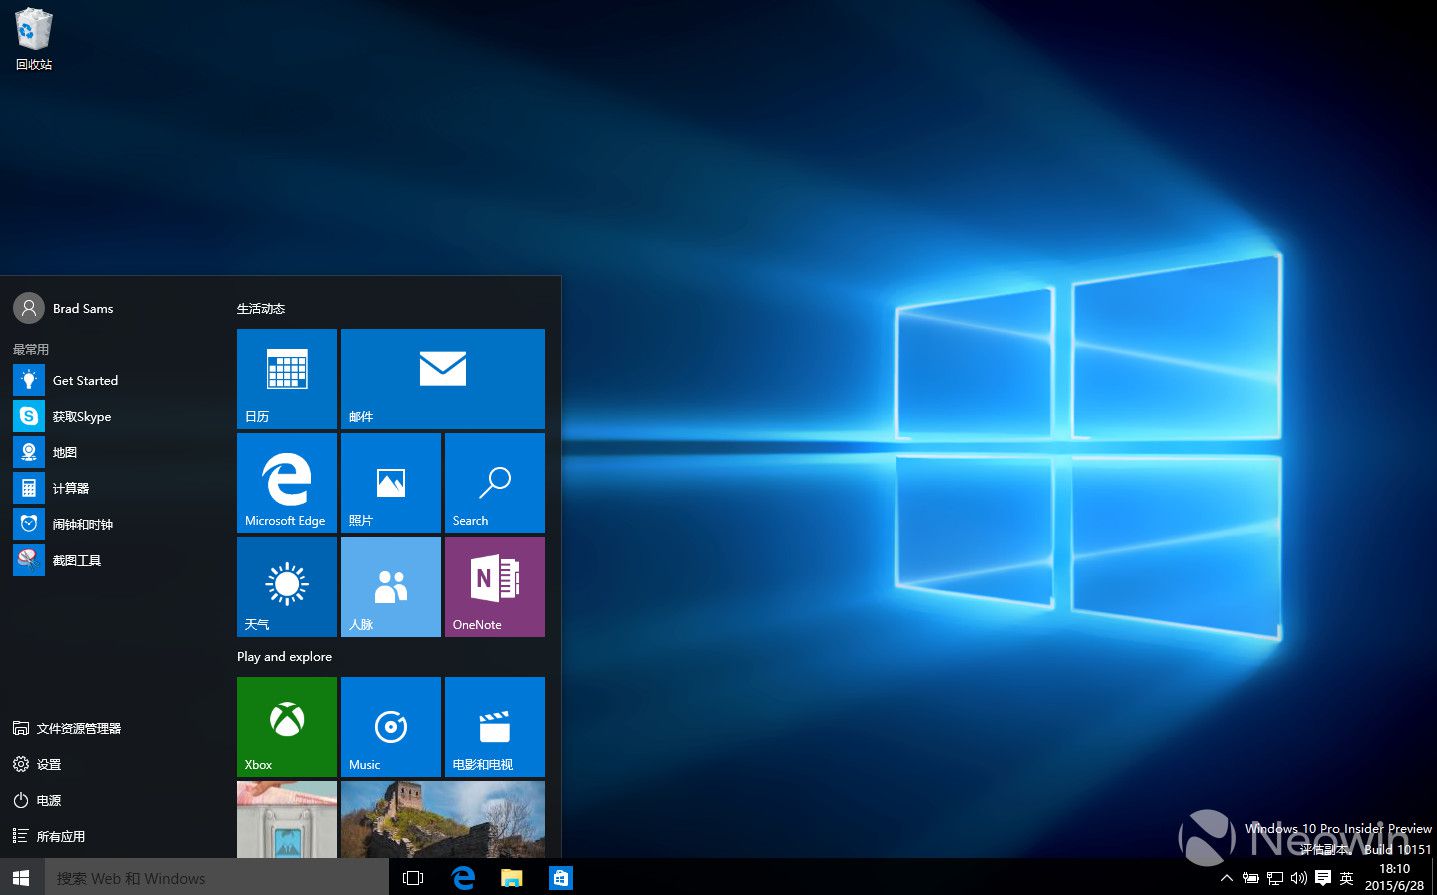 Windows-10-Insider-Preview-build-10151